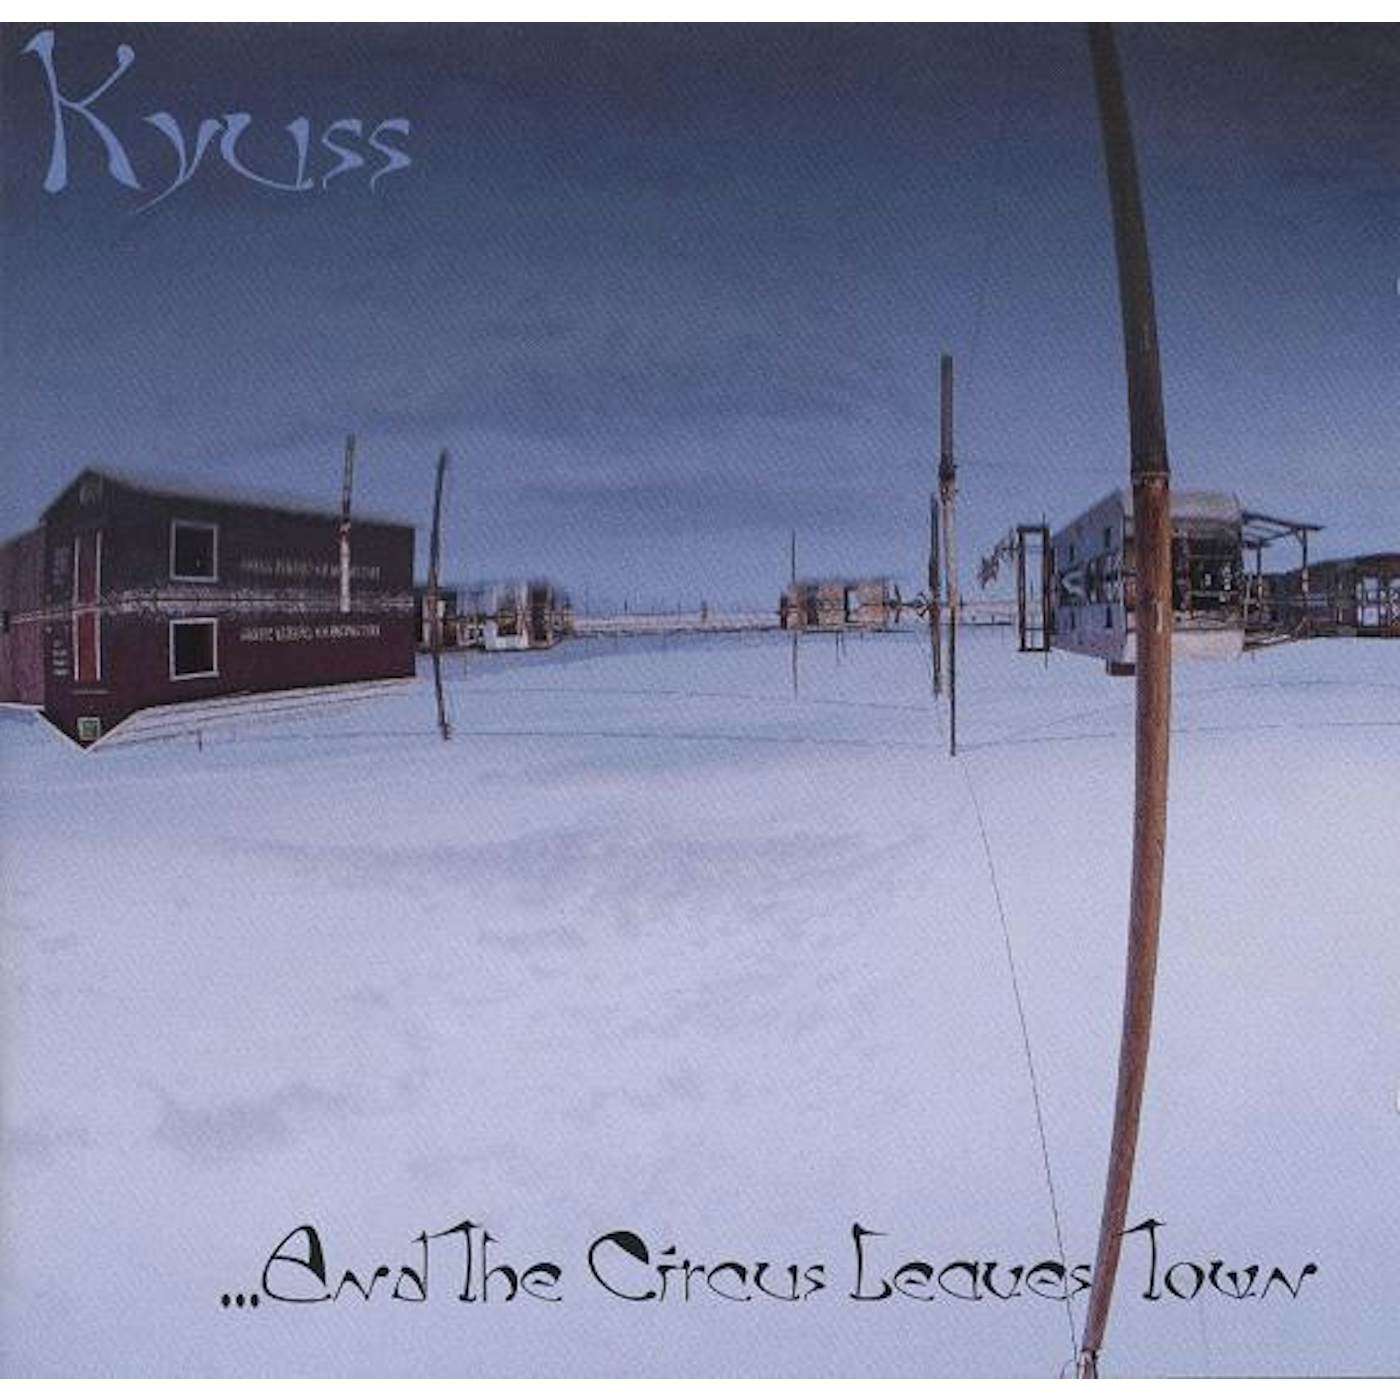 Kyuss AND THE CIRCUS LEAVES TOWN CD